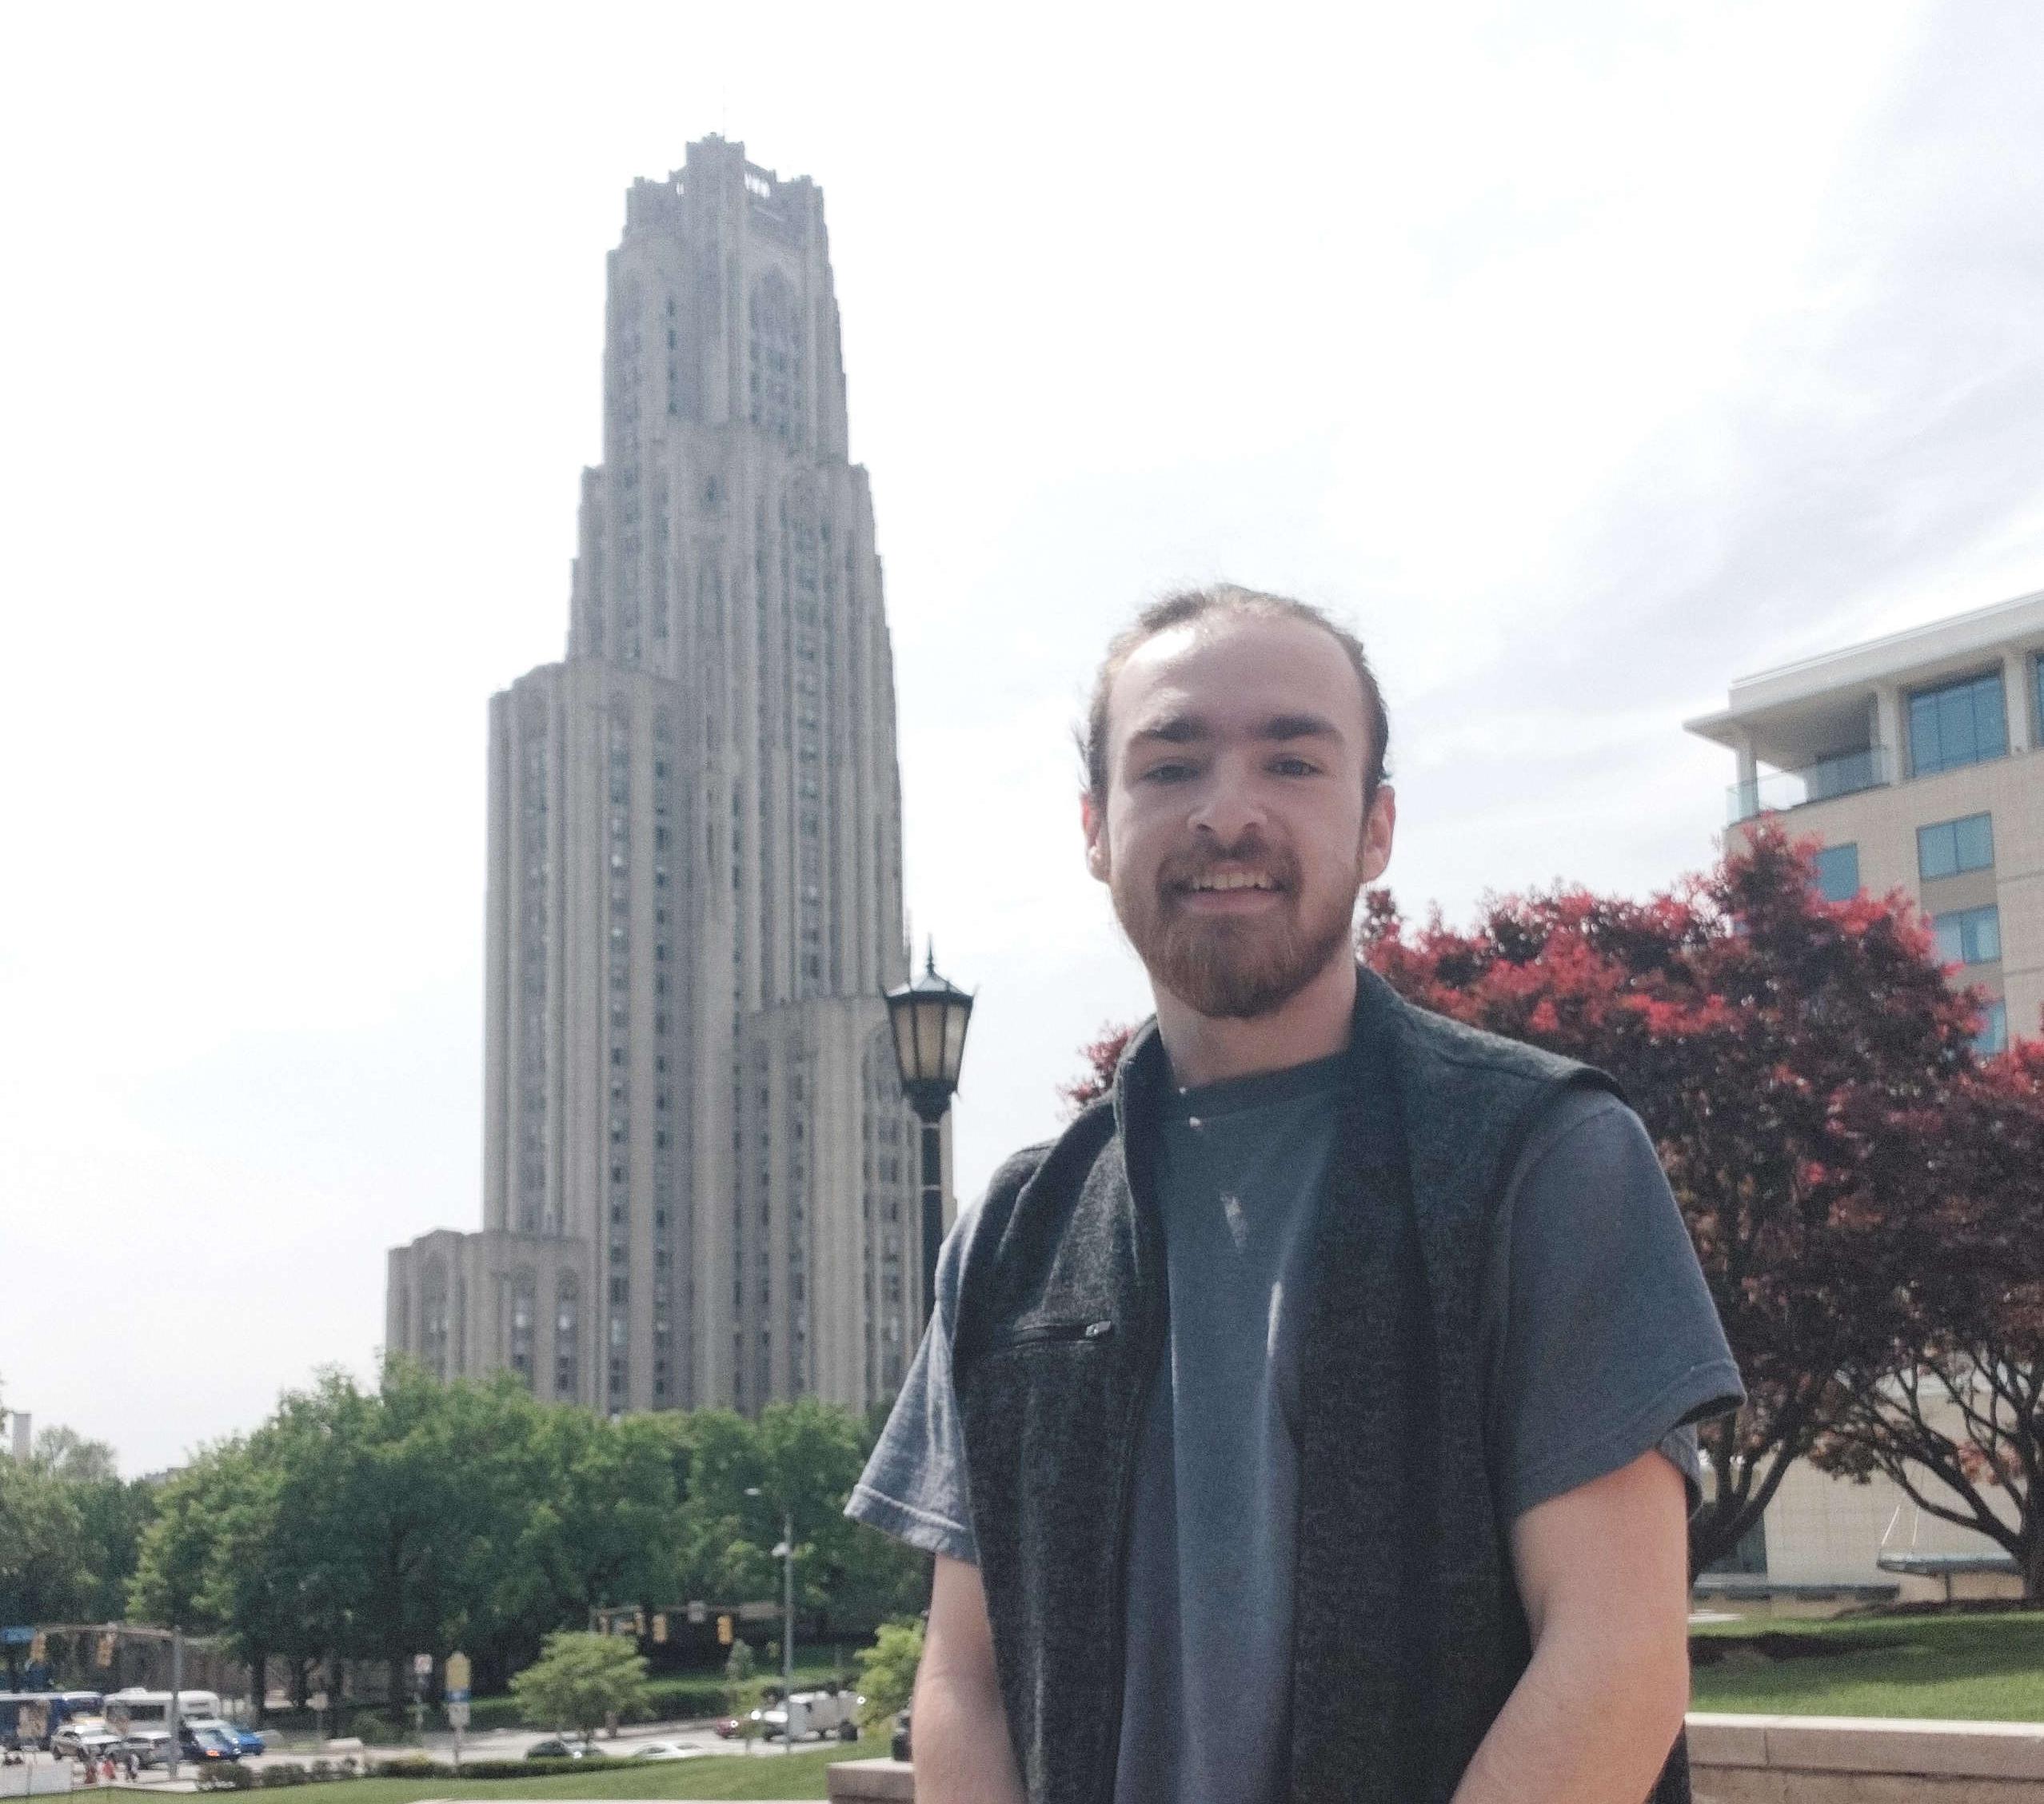 Rob standing in front of the Cathedral of Learning